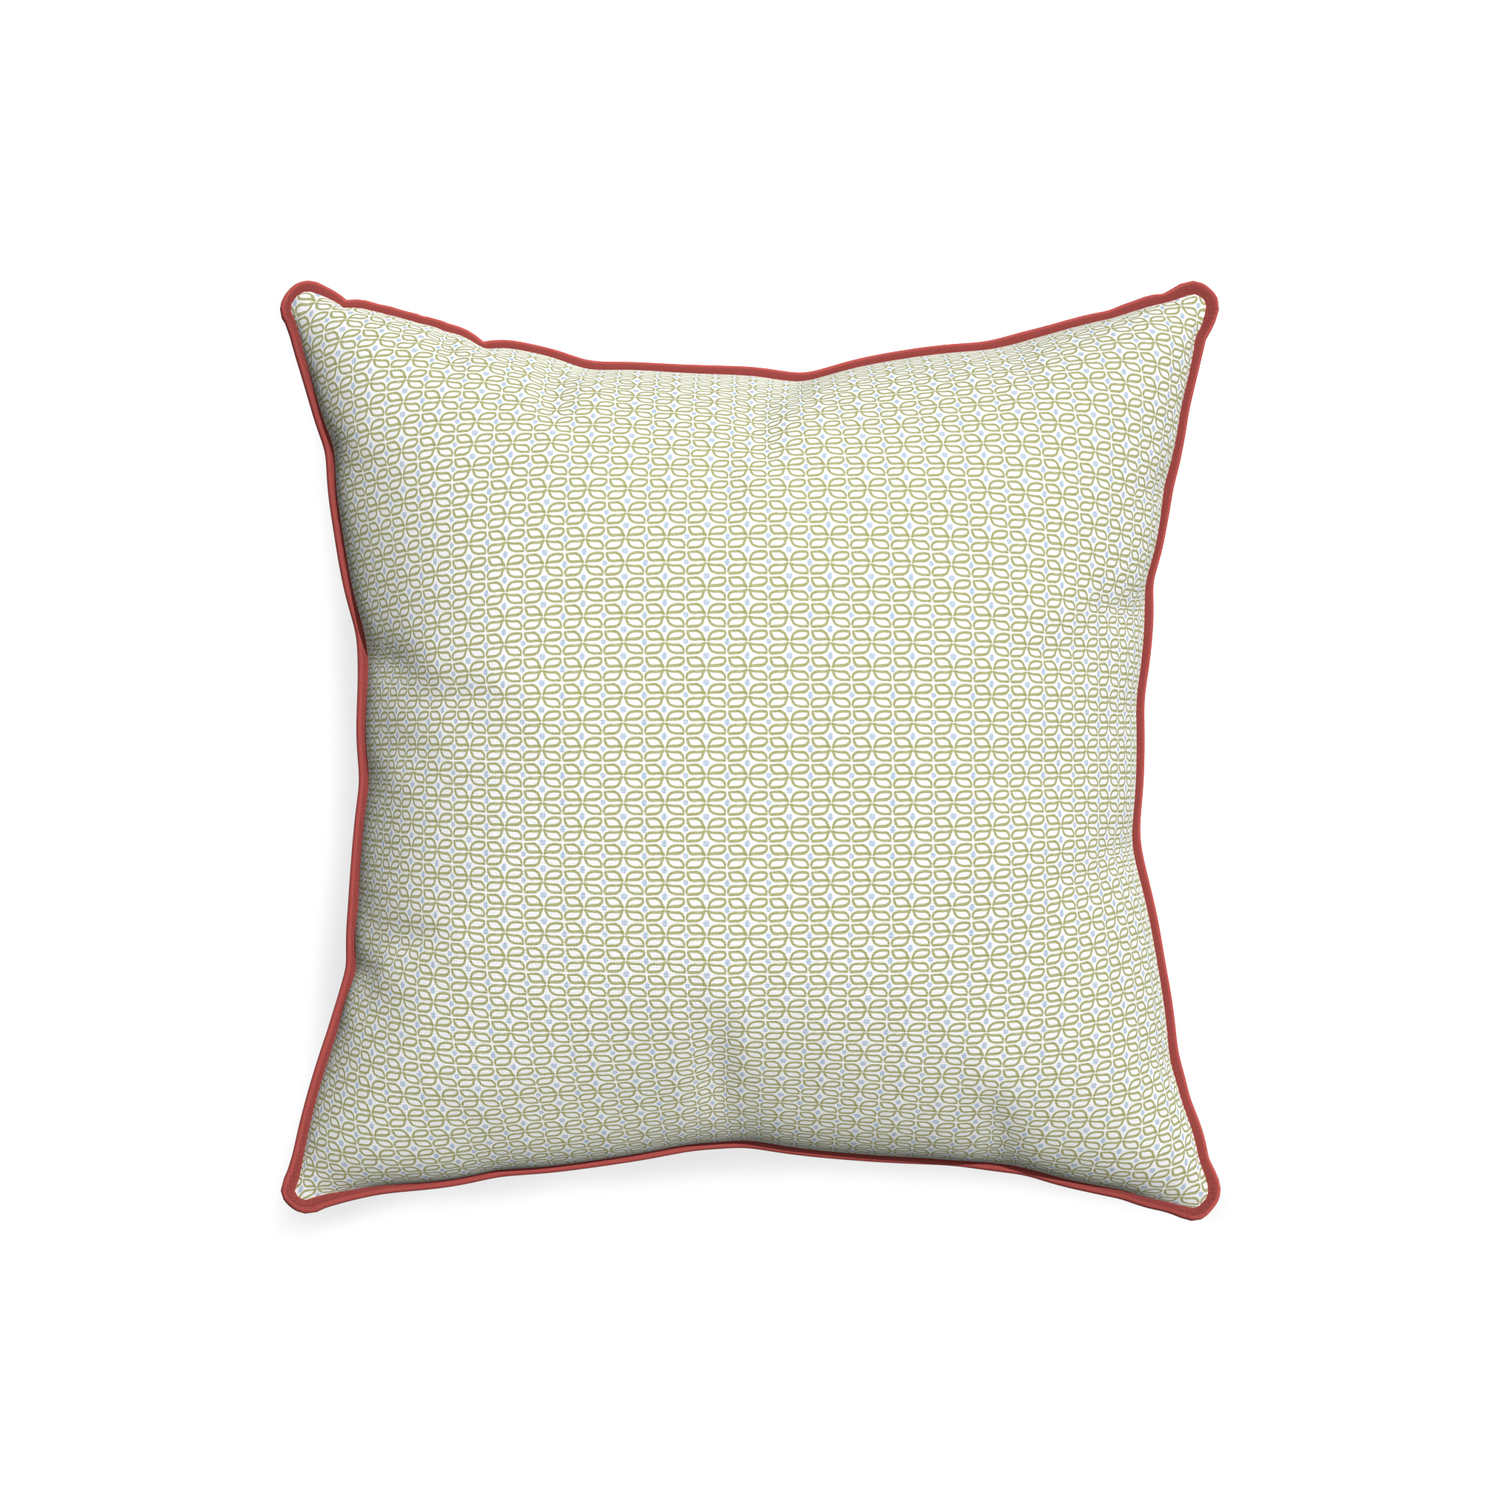 20-square loomi moss custom pillow with c piping on white background